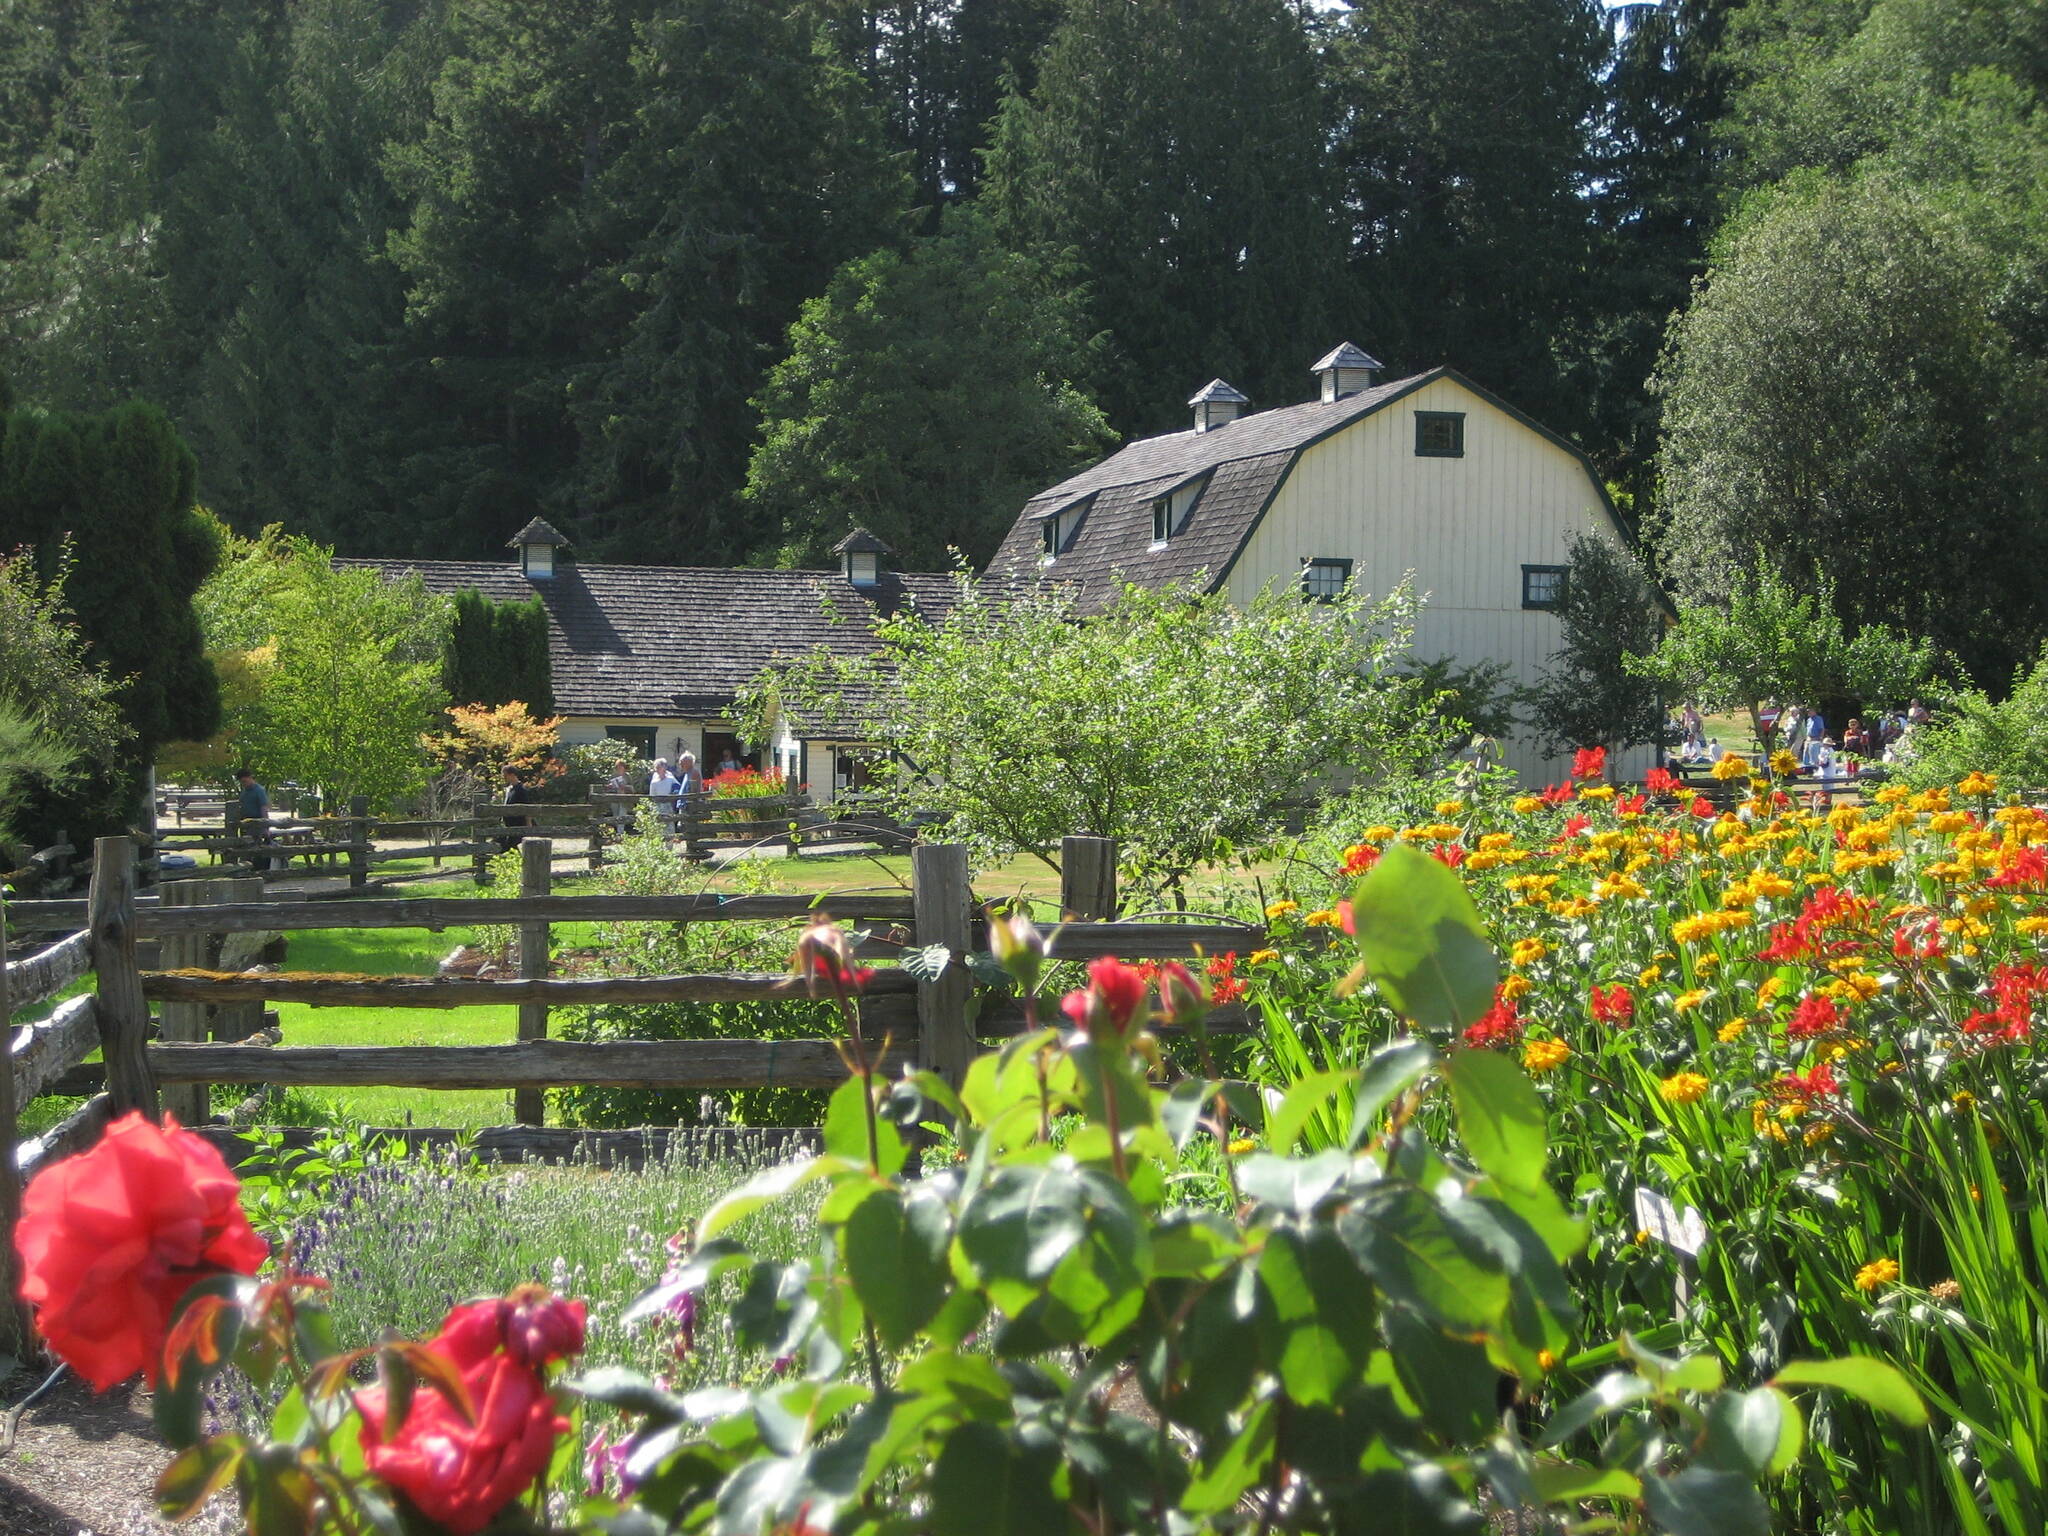 The annual Concerts in the Barn series in Quilcene runs July 9-Sept. 4. Photo courtesy of Concerts in the Barn